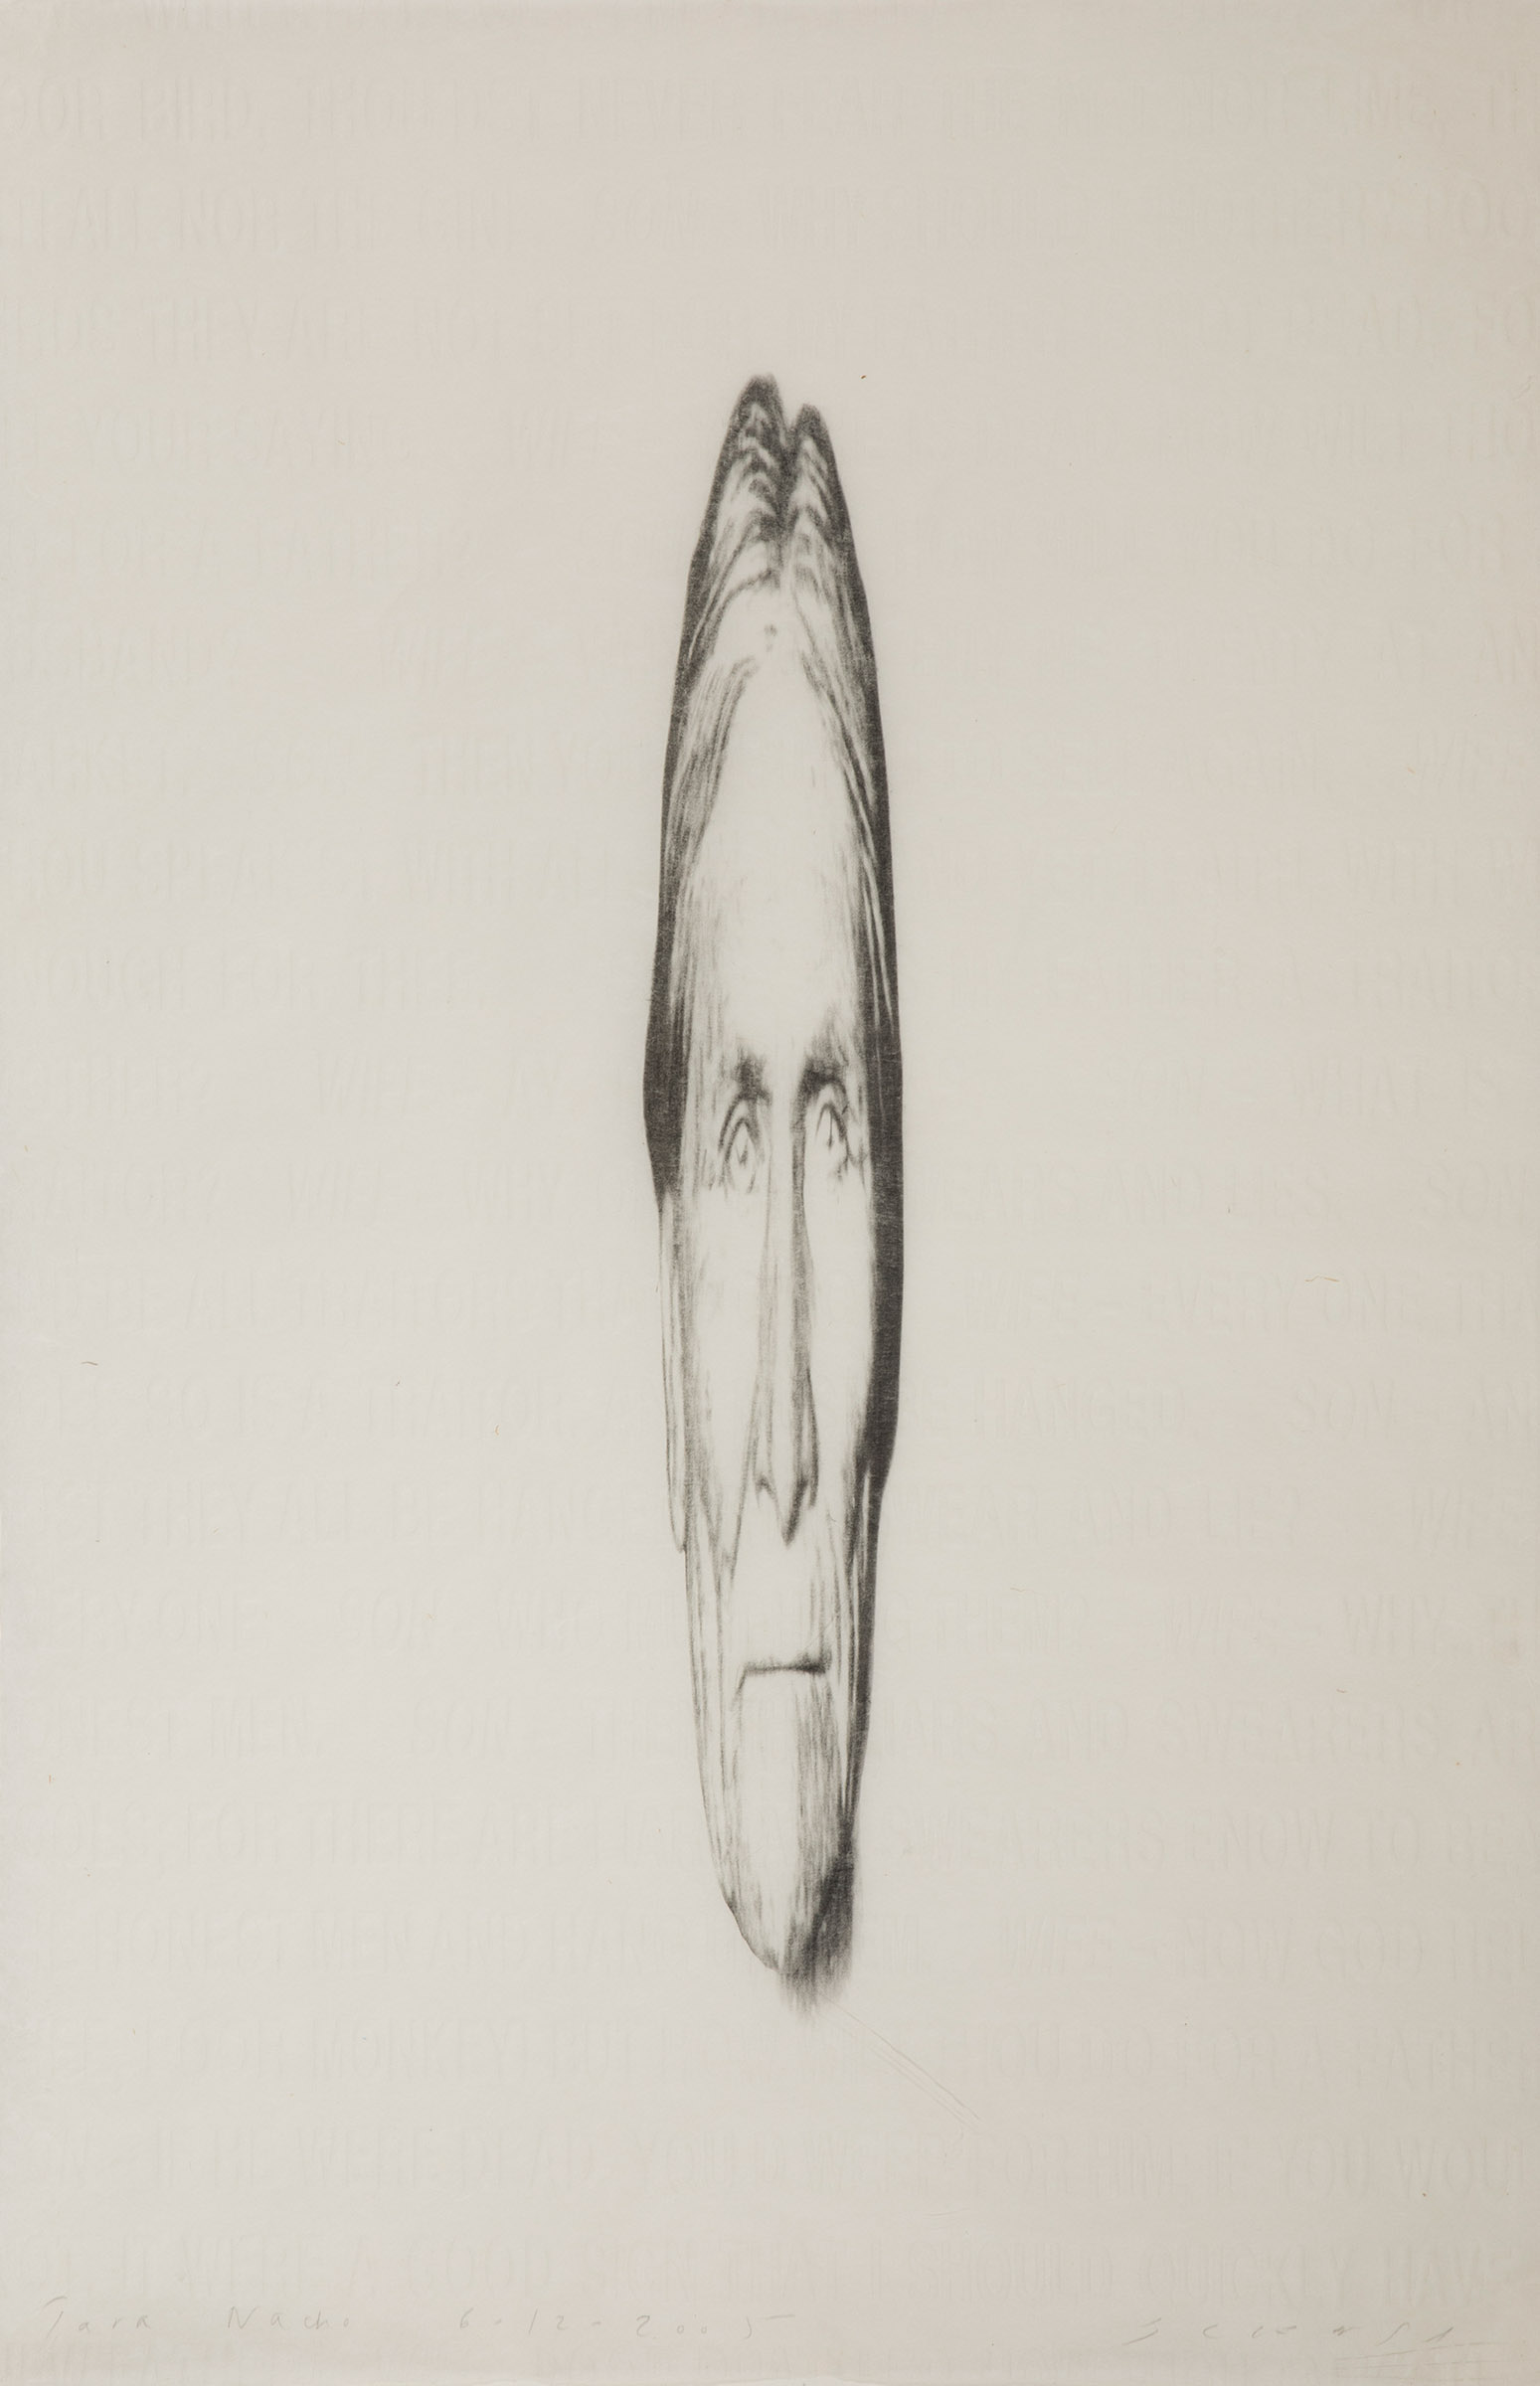 JAUME PLENSA (Barcelona, 1955)."Anonim I", 2005-Lithography and etching on Kôzo paper (20gr). Copy